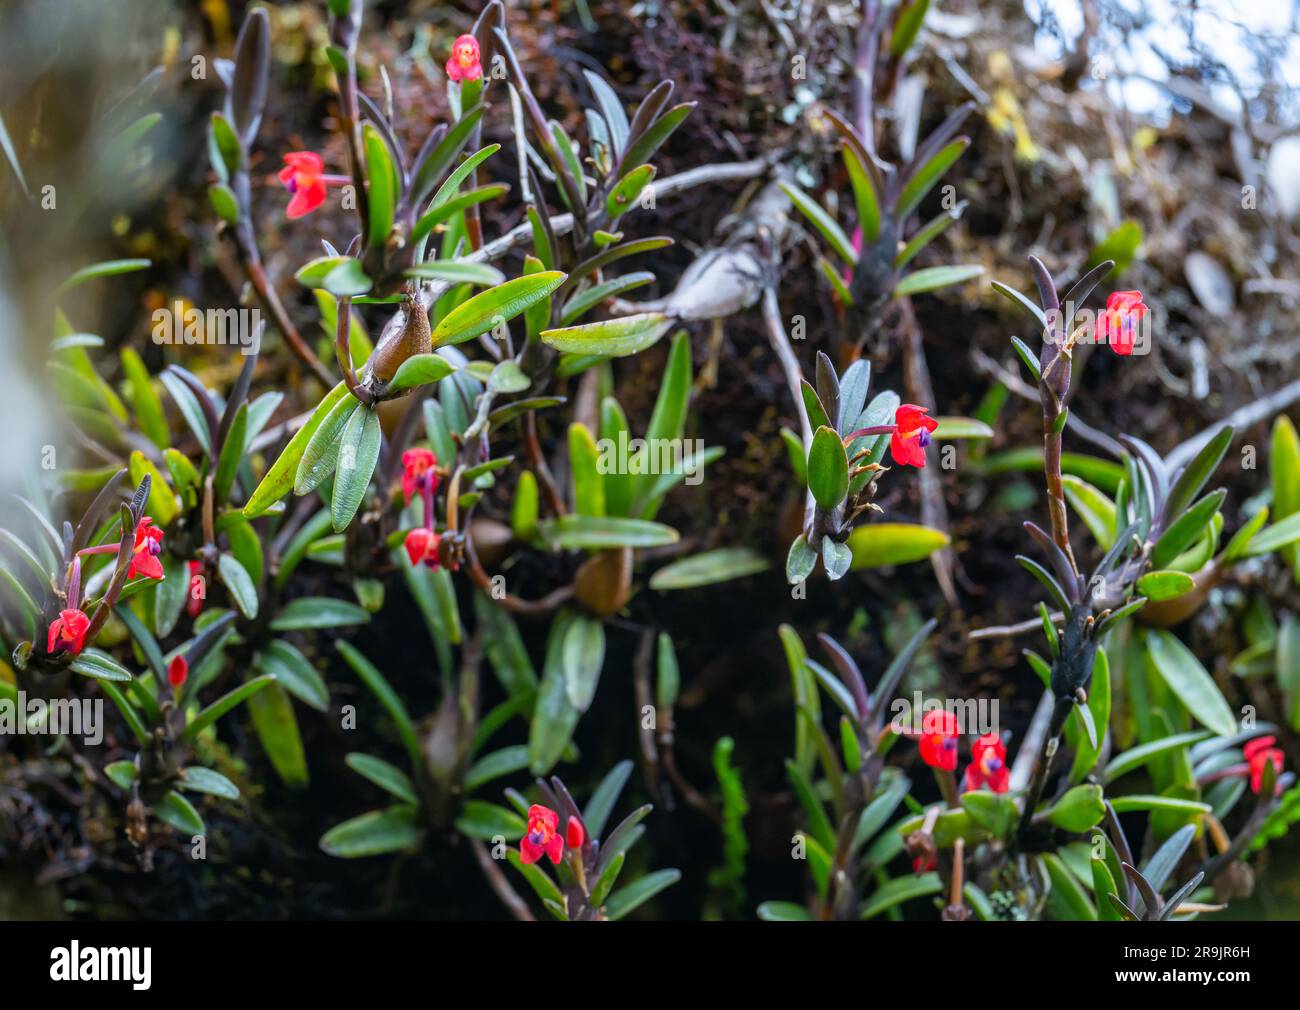 Wild orchid with small red flowers in full bloom. Colombia, South America. Stock Photo